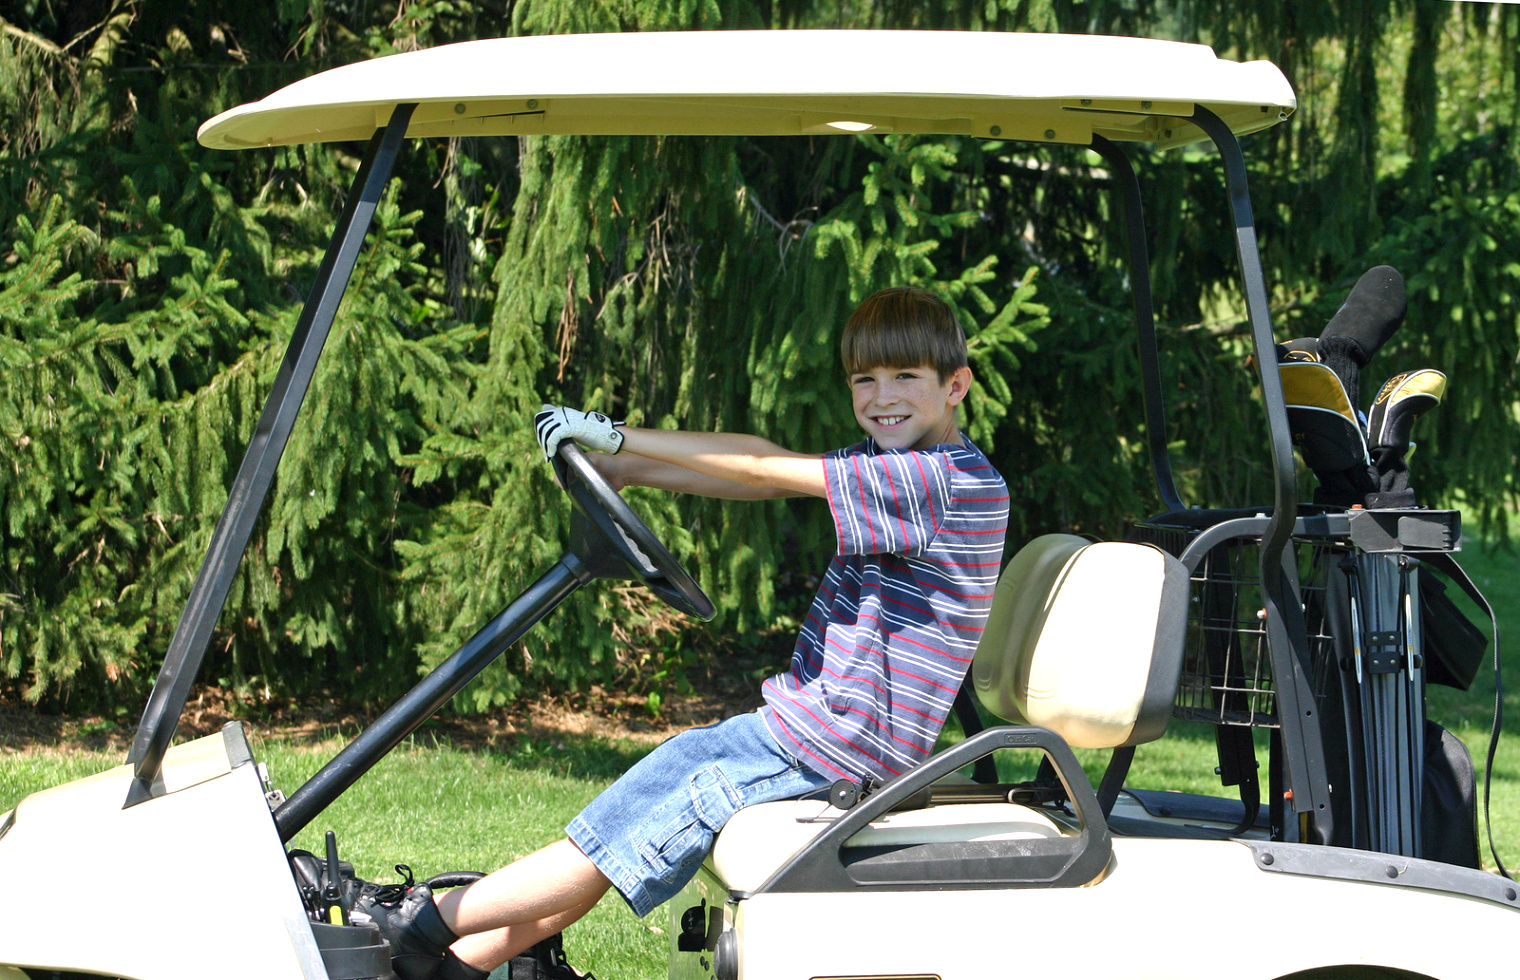 Pedestrian Accident Lawyer Near Me Dans Golf Cart Accident Lawyer Fl Law Fice Of Reese Harvey